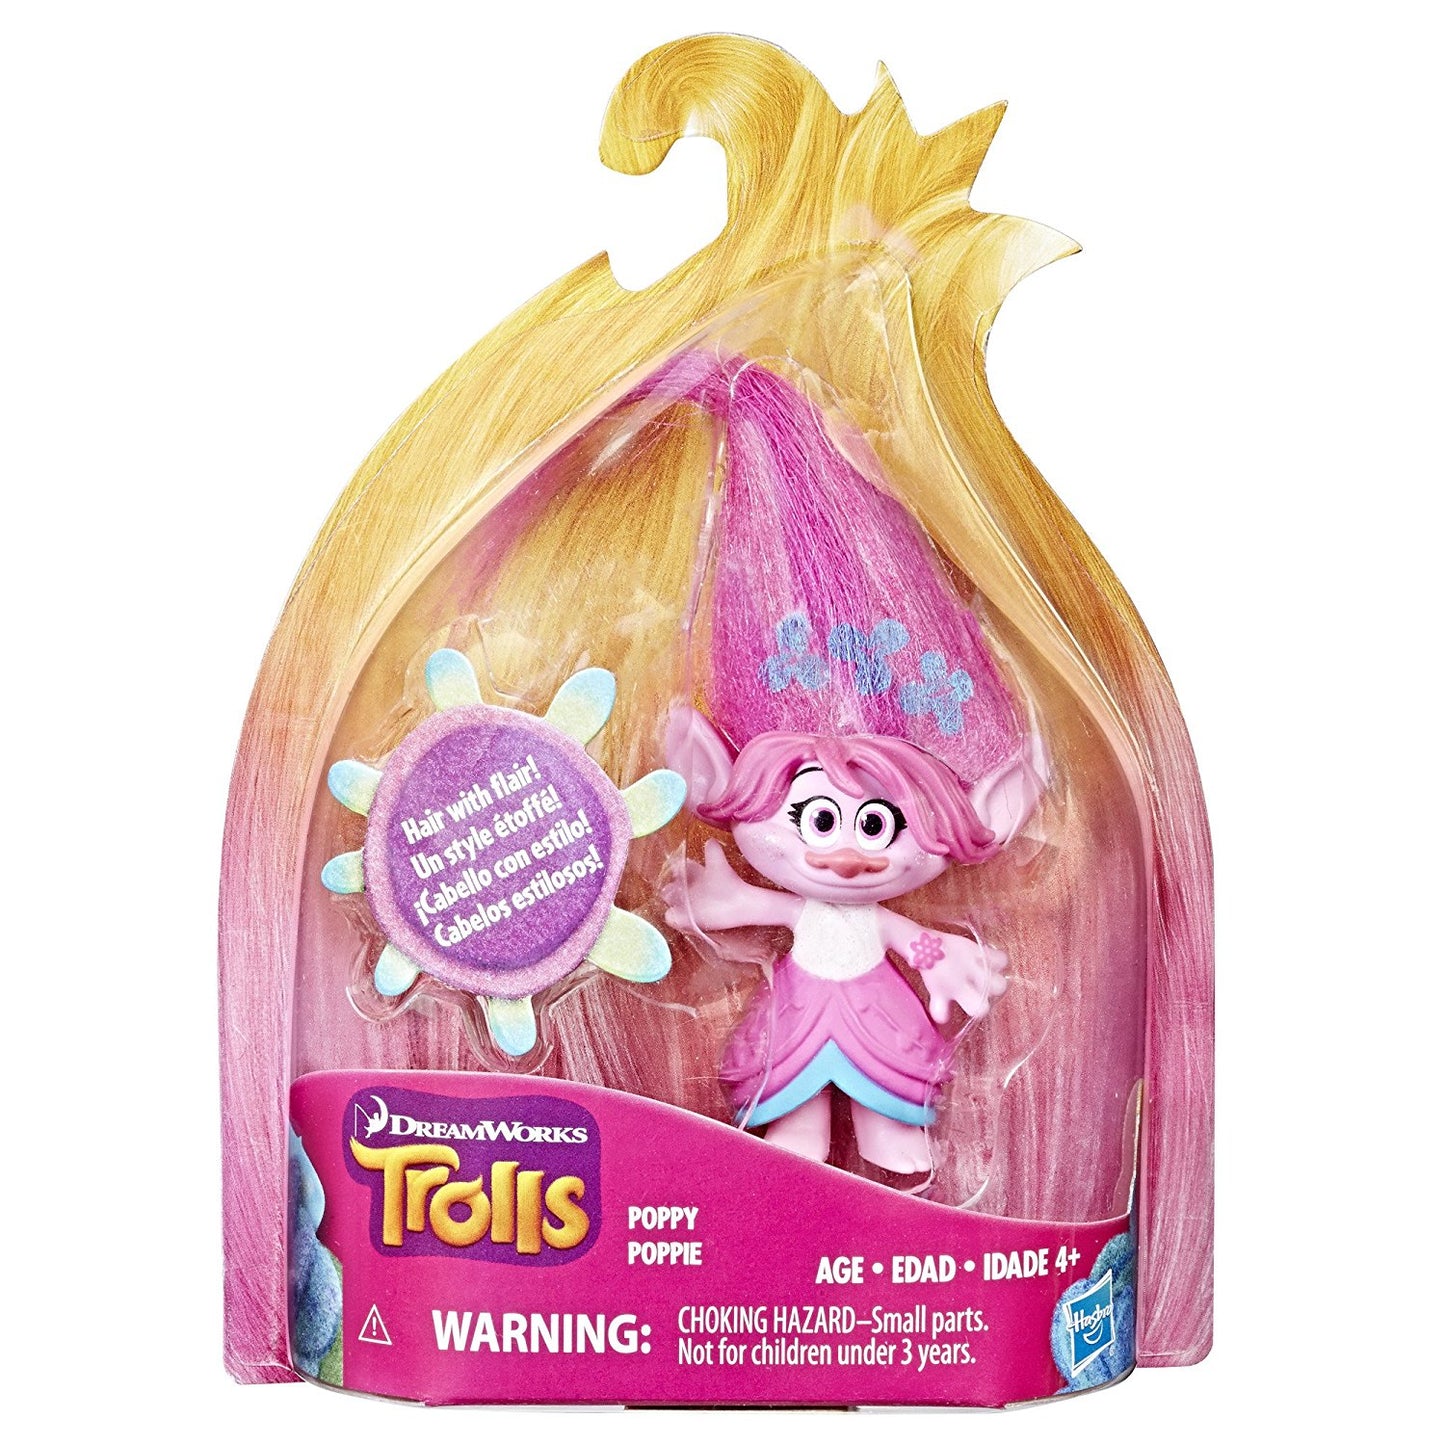 Trolls Poppy Hair Collectible Figure with Printed Hair